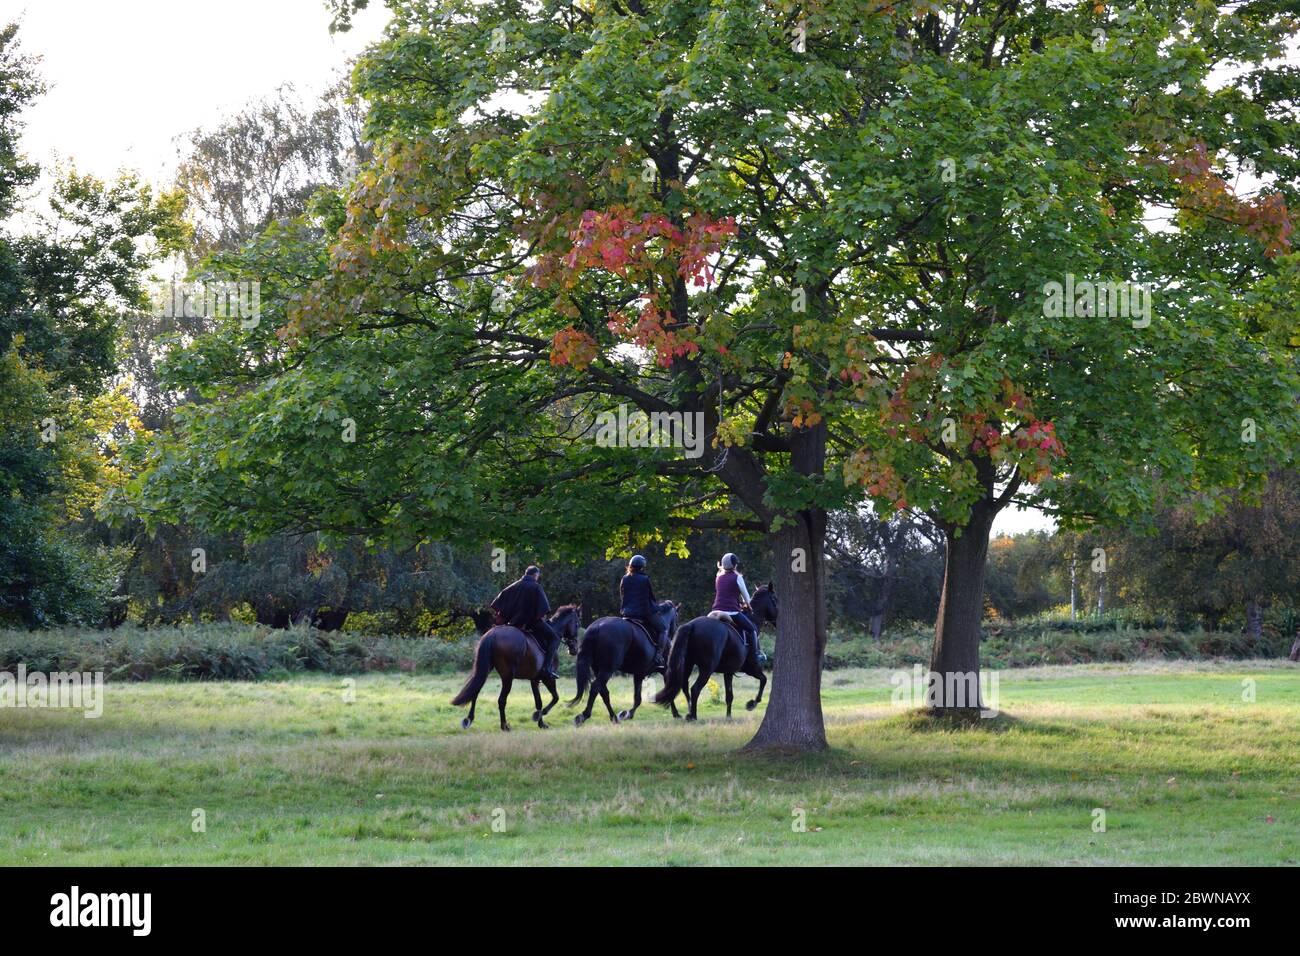 Three Riders On Horseback In A Park In England Stock Photo Alamy